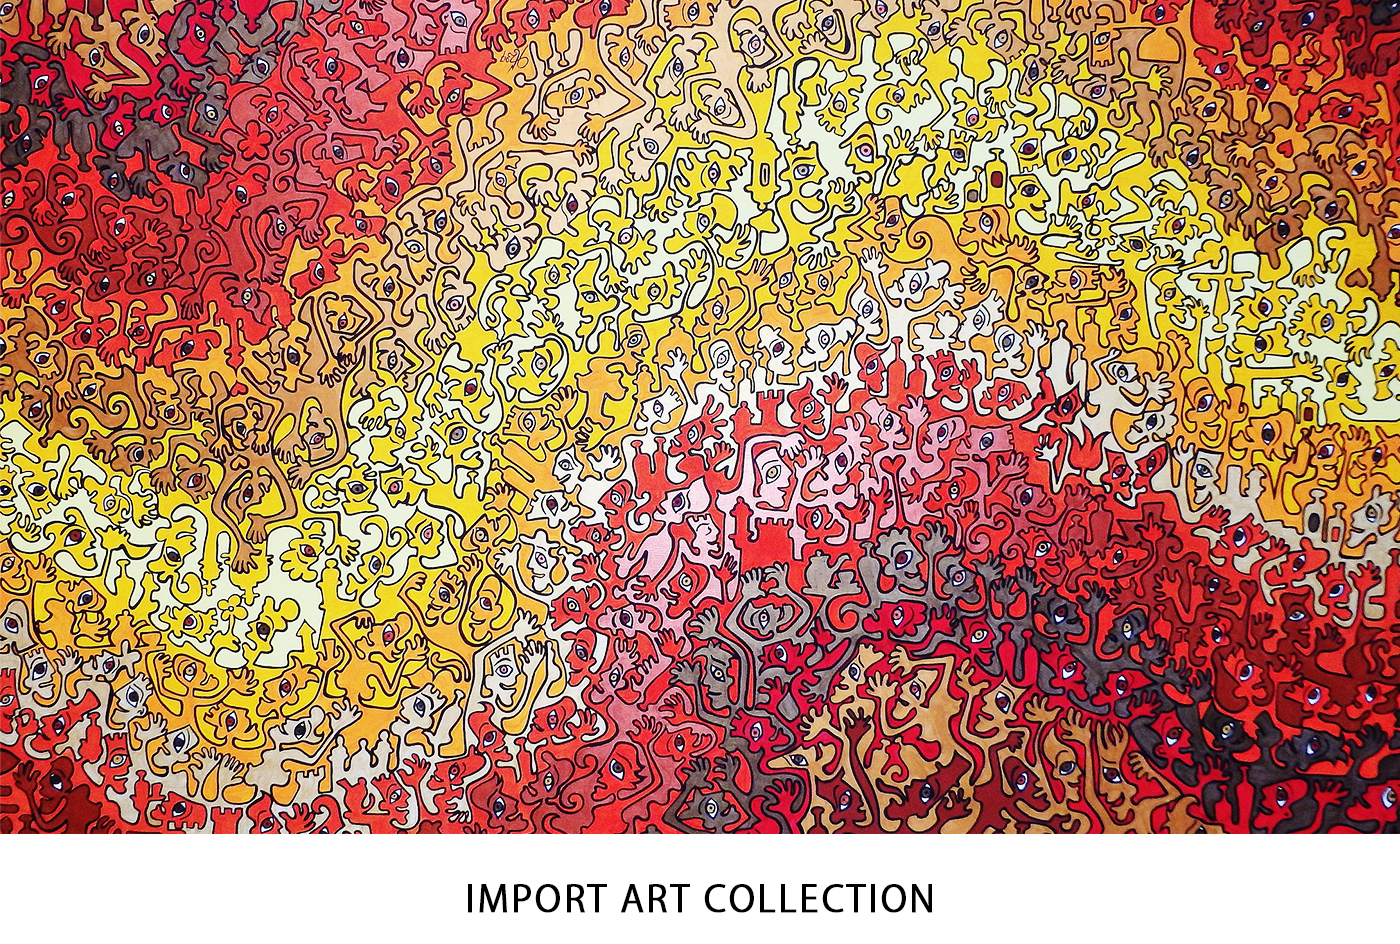 IMPORT ART COLLECTION